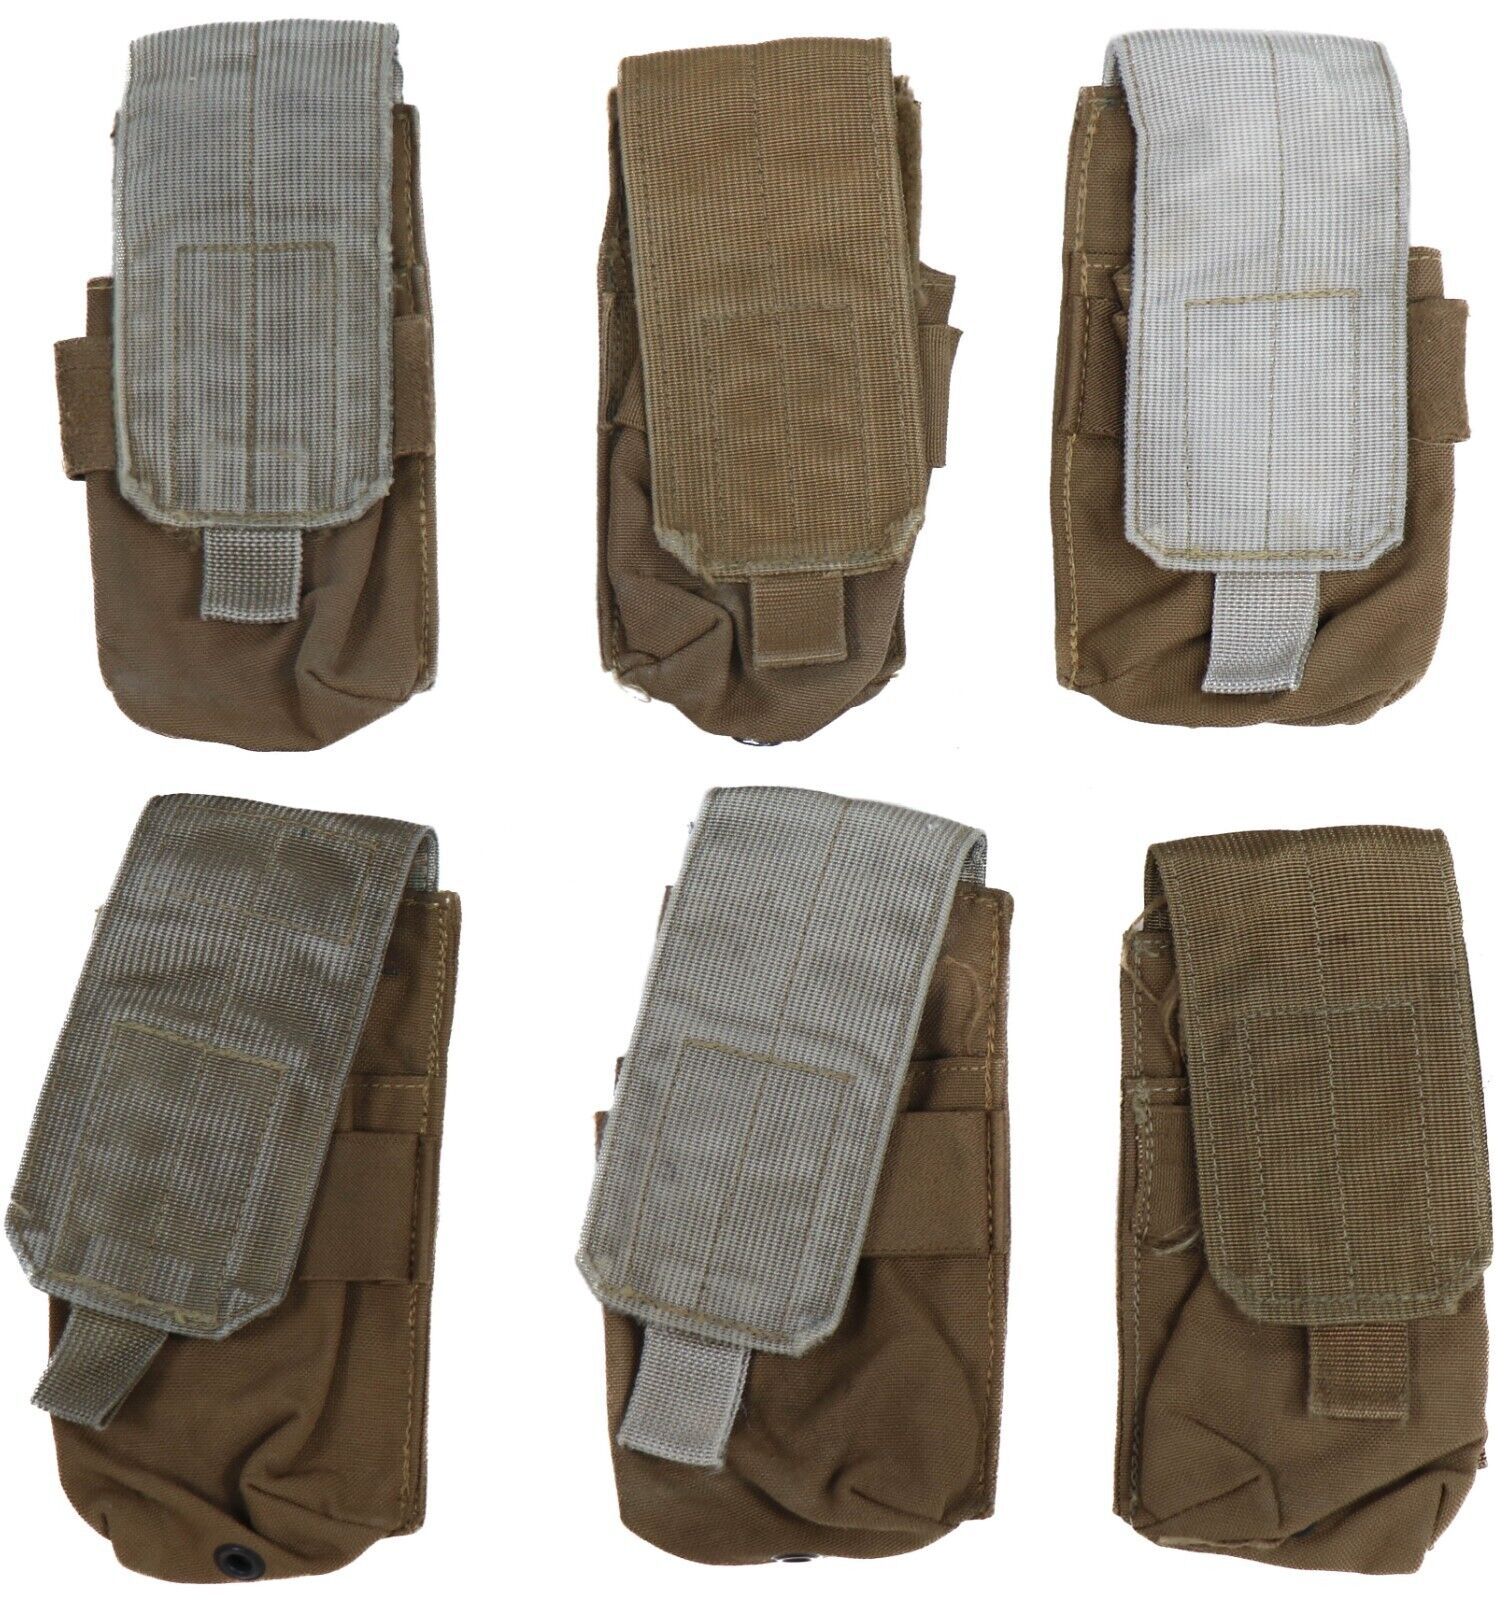 6x US Marine Corp Molle II Double Single Mag Pouch Coyote USMC Ammo Pouch FILBE